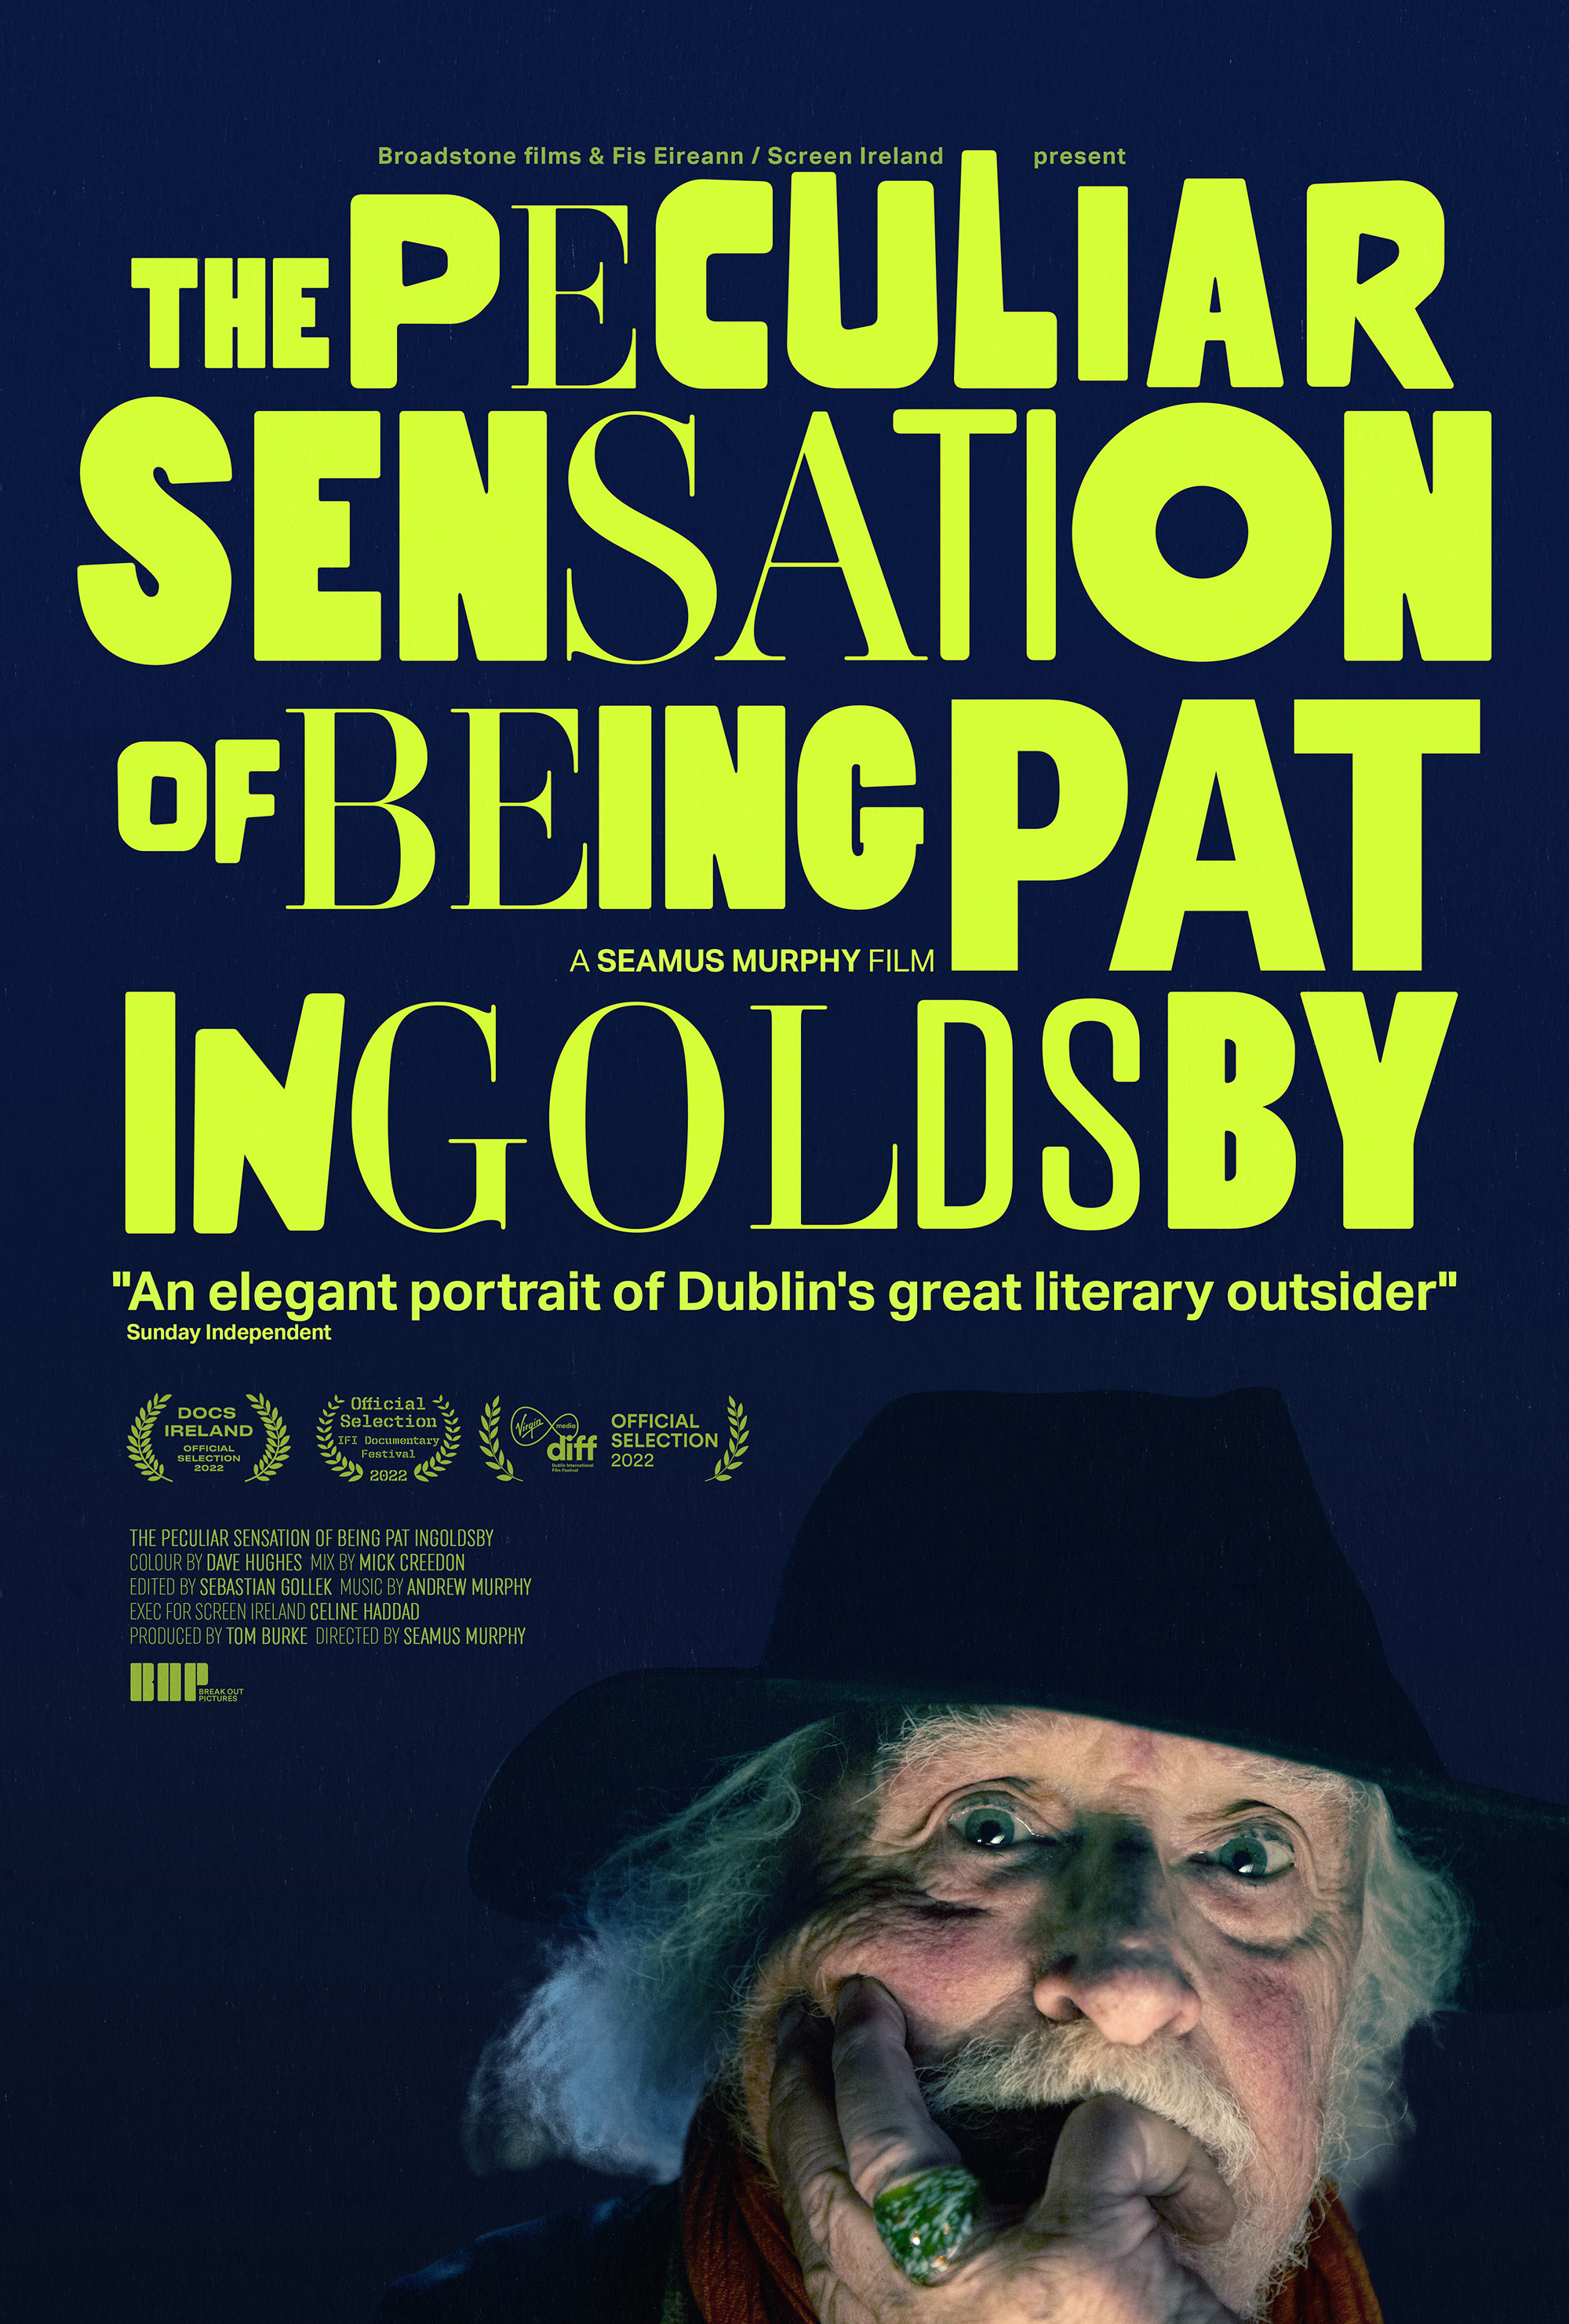 Mega Sized Movie Poster Image for The Peculiar Sensation of Being Pat Ingoldsby 